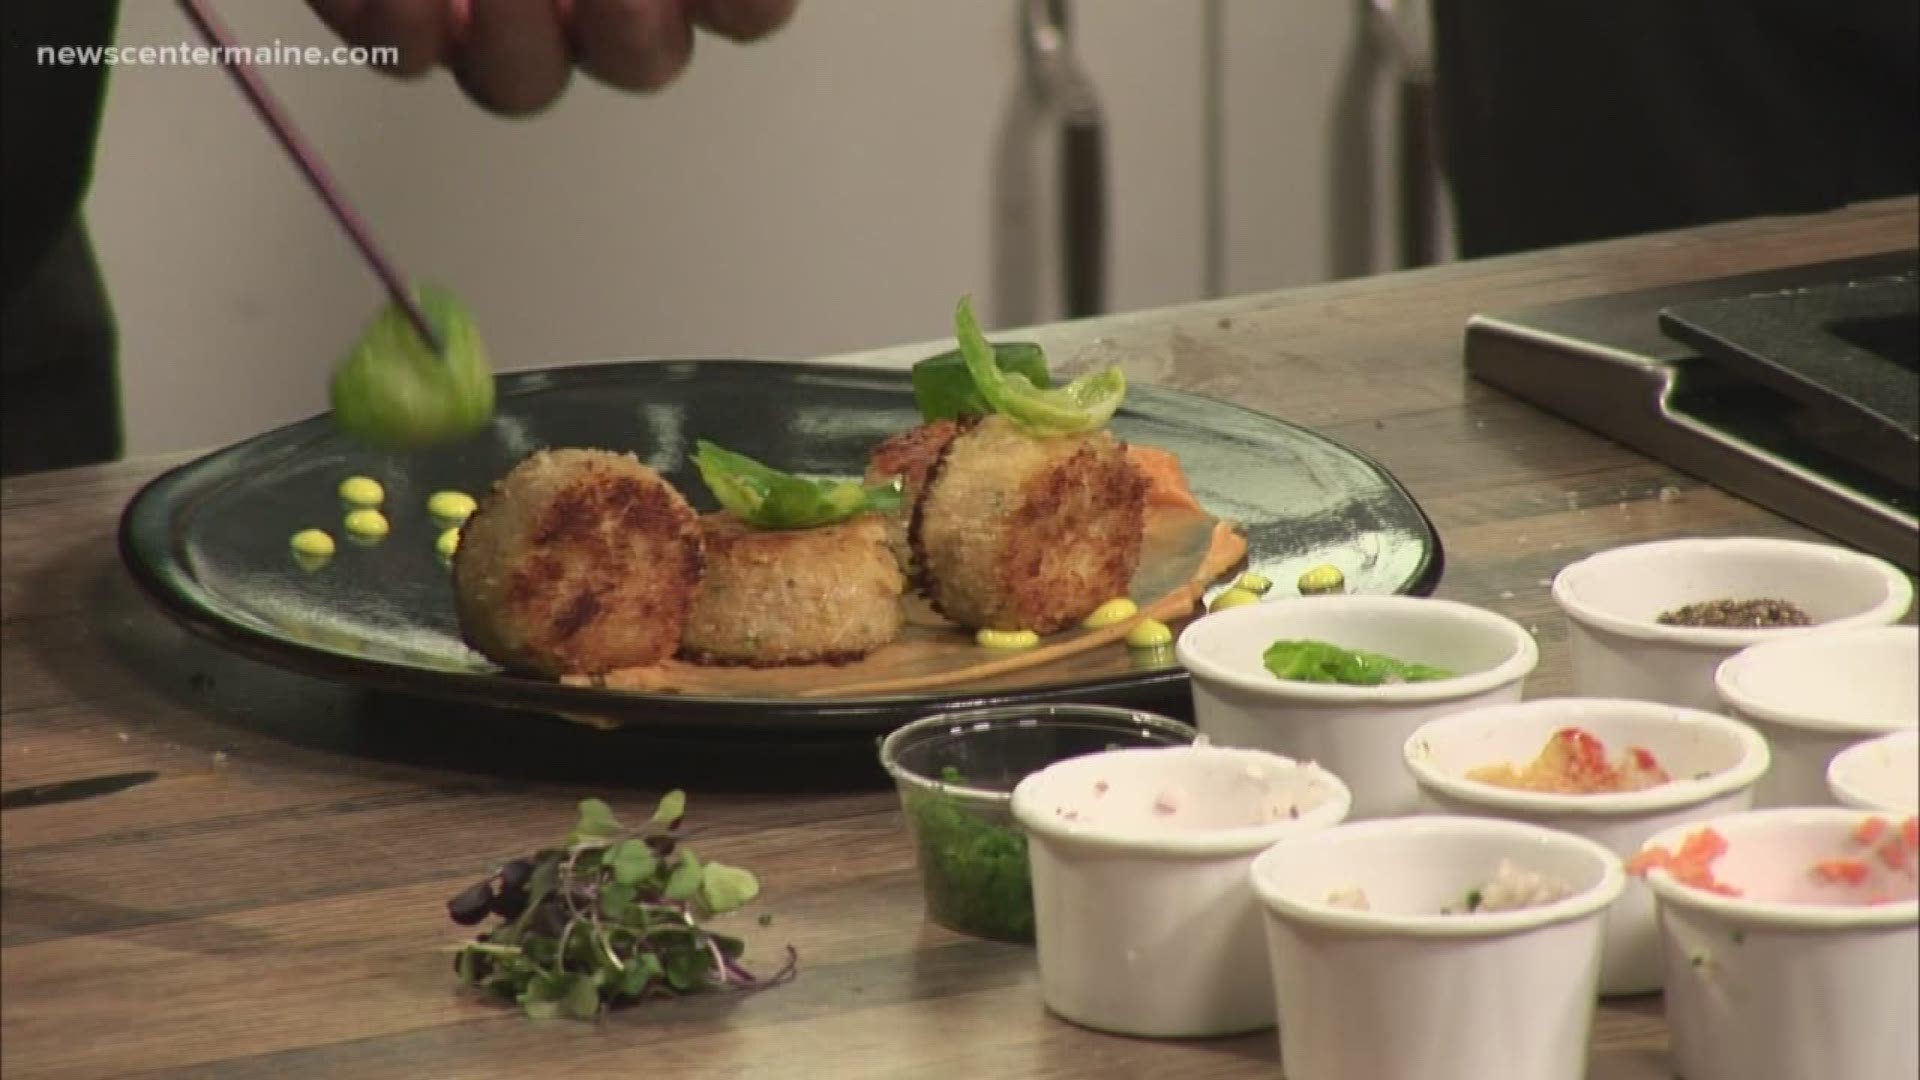 Christian Bassett is the Executive Chef at The Brunswick Inn & Tavern and he shares his recipe for these tasty little devils.